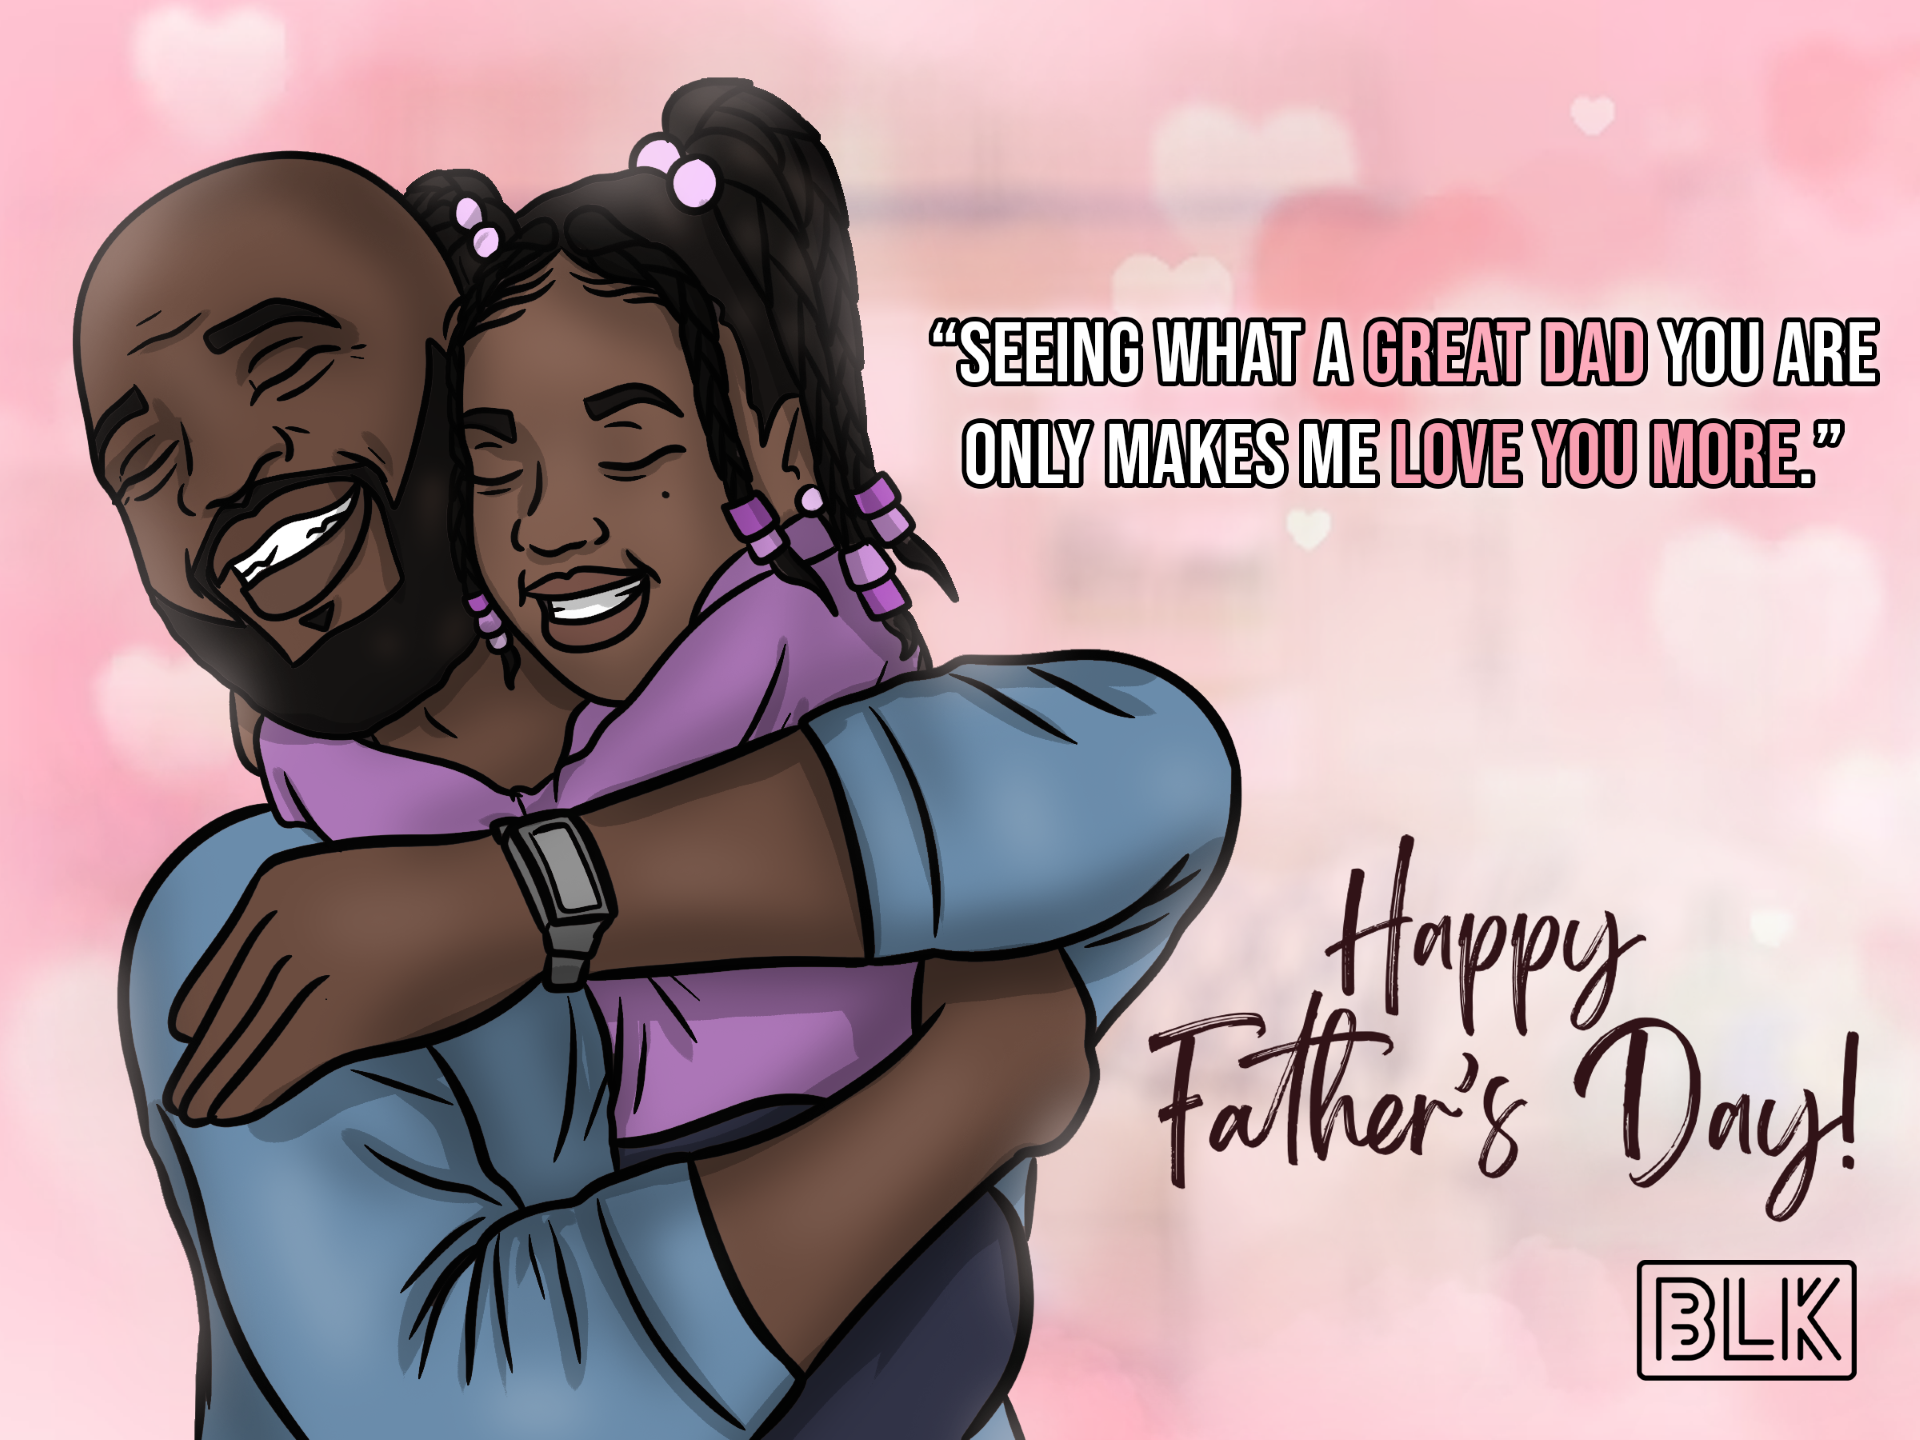 BLK Dating App Celebrates Black Single Fathers With An Empowering Campaign For Father’s Day